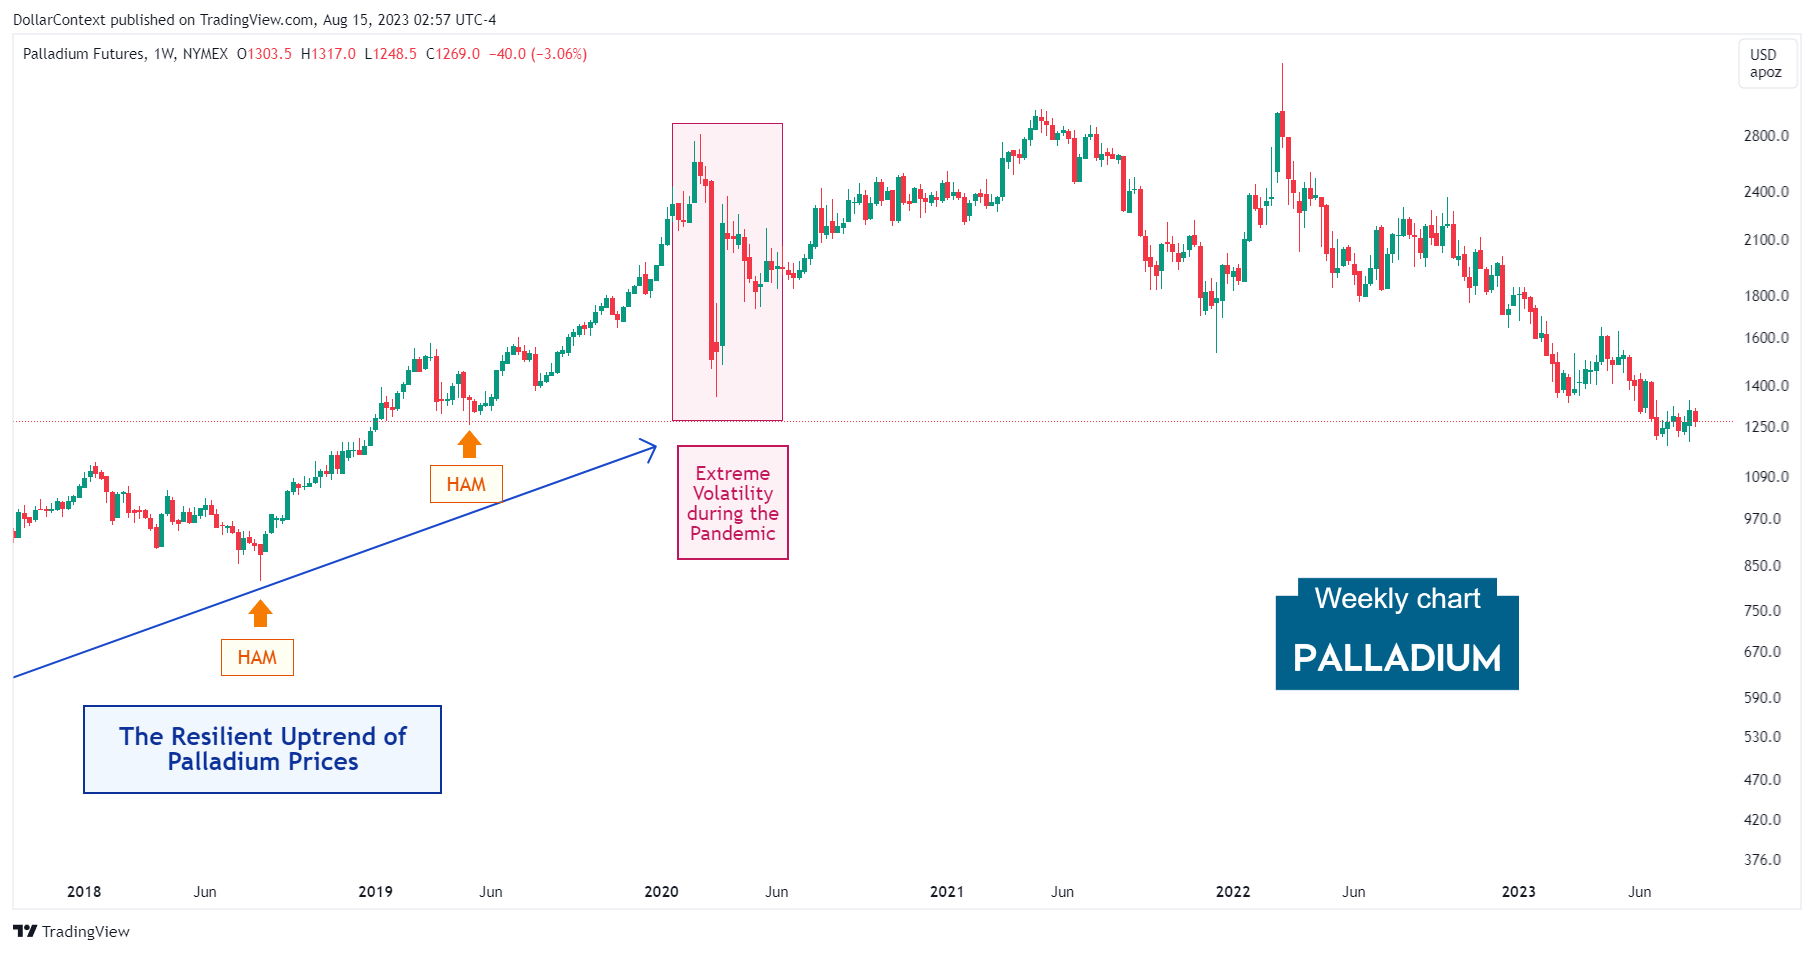 Palladium Futures: Volatility During the Initial Phase of the Pandemic